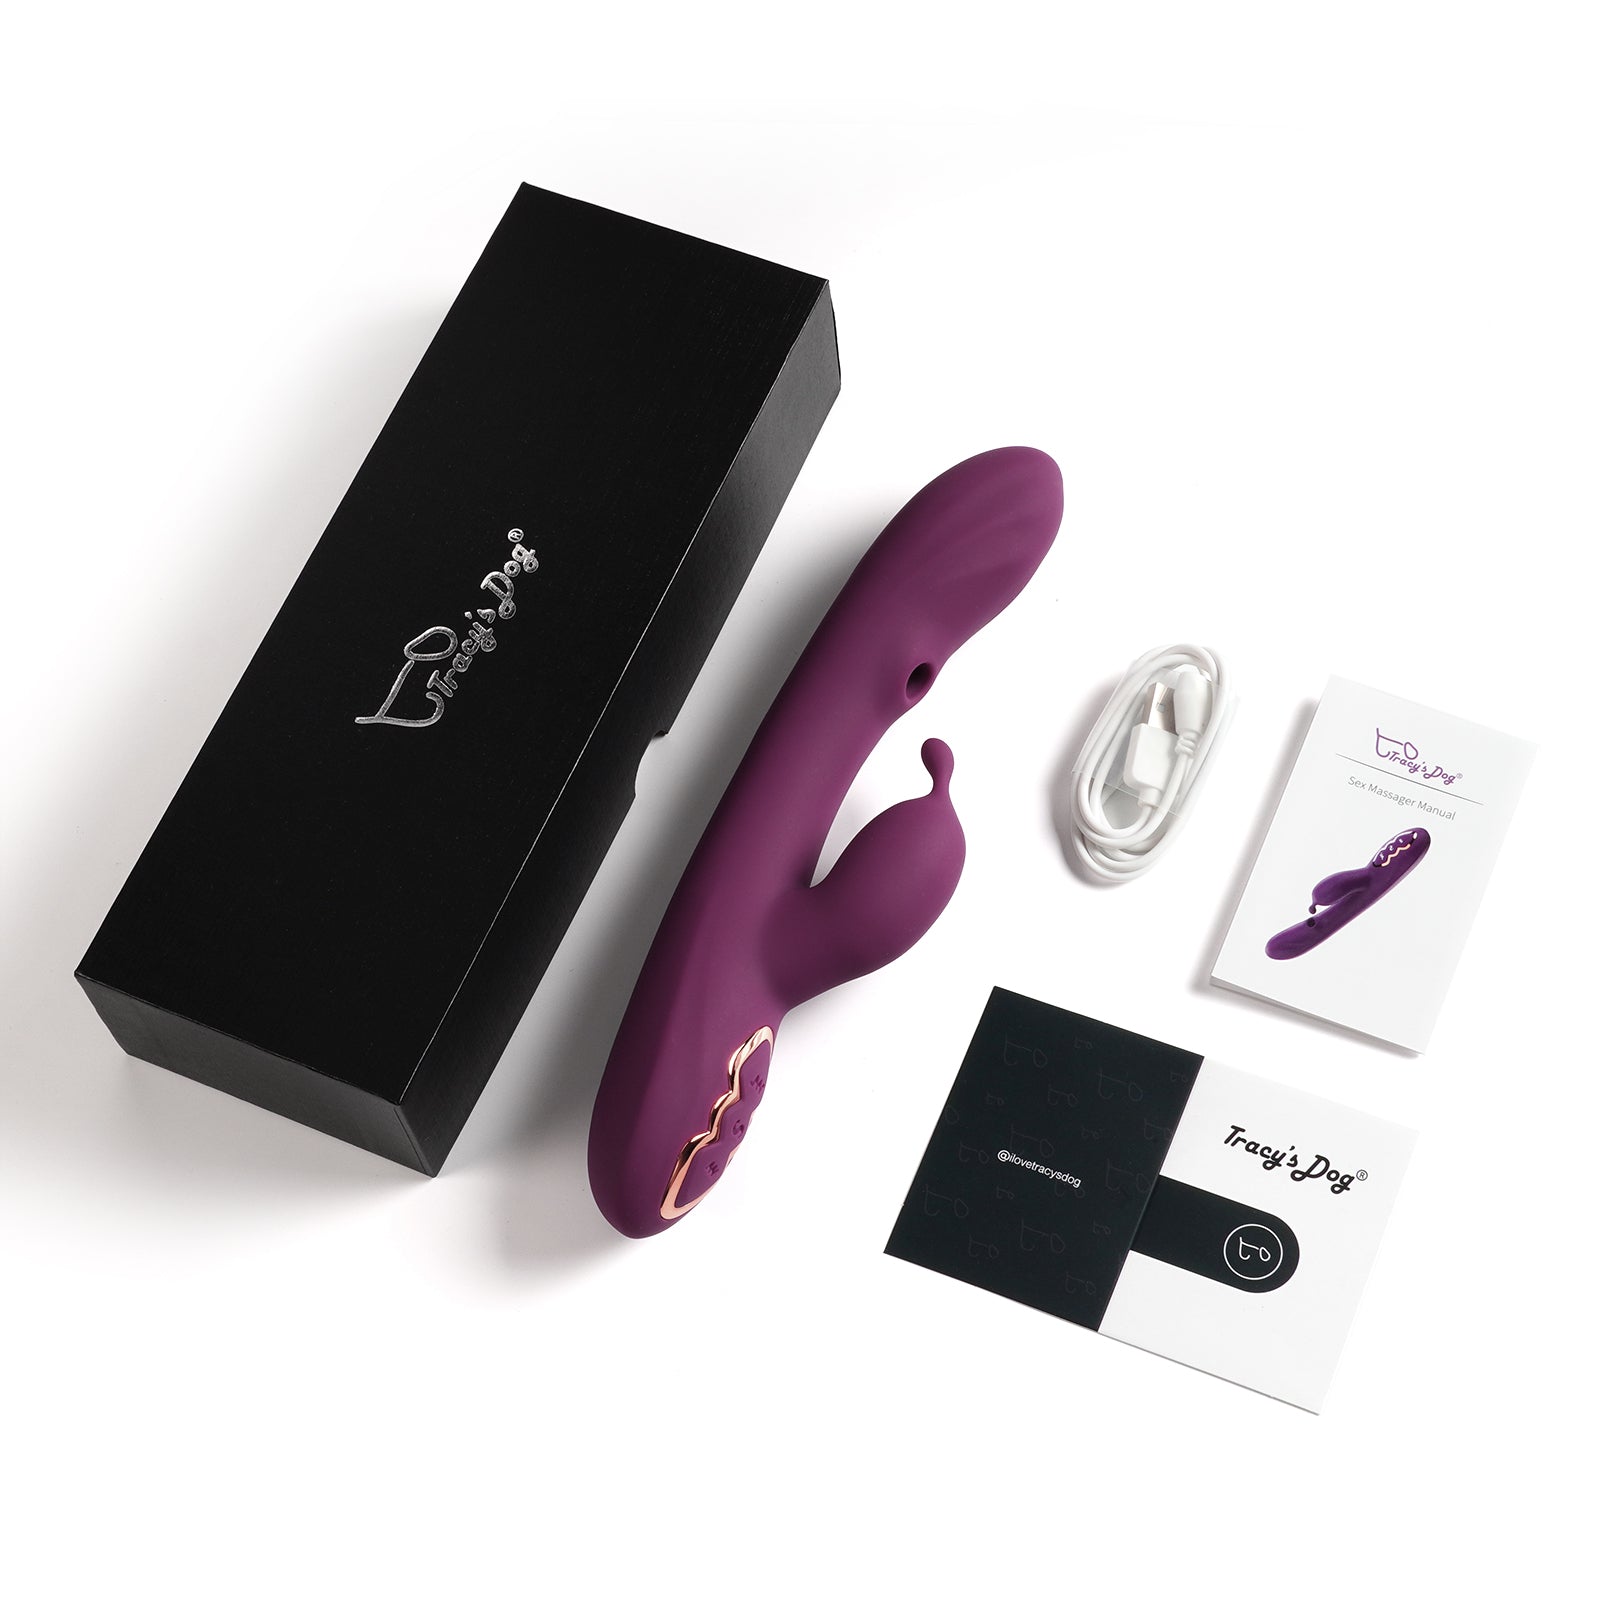 Alpha Rabbit Sucking Vibrator, with Instruction manual, warranty card, charging cable, and box